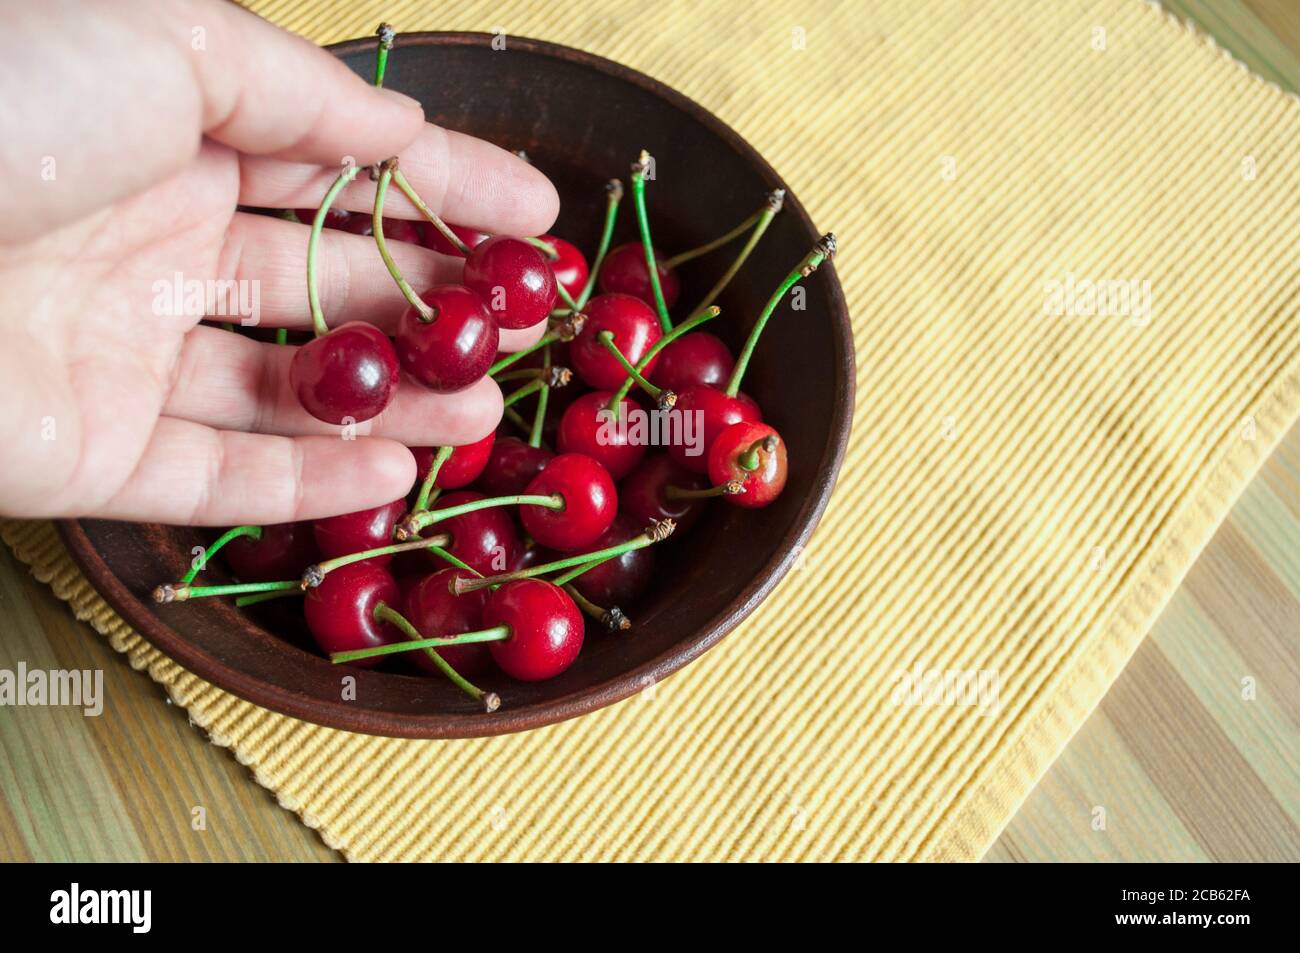 A woman aged 30-40 holds three ripe cherries over a plate of cherries. The photo shows part of the palm and a plate with cherries Stock Photo